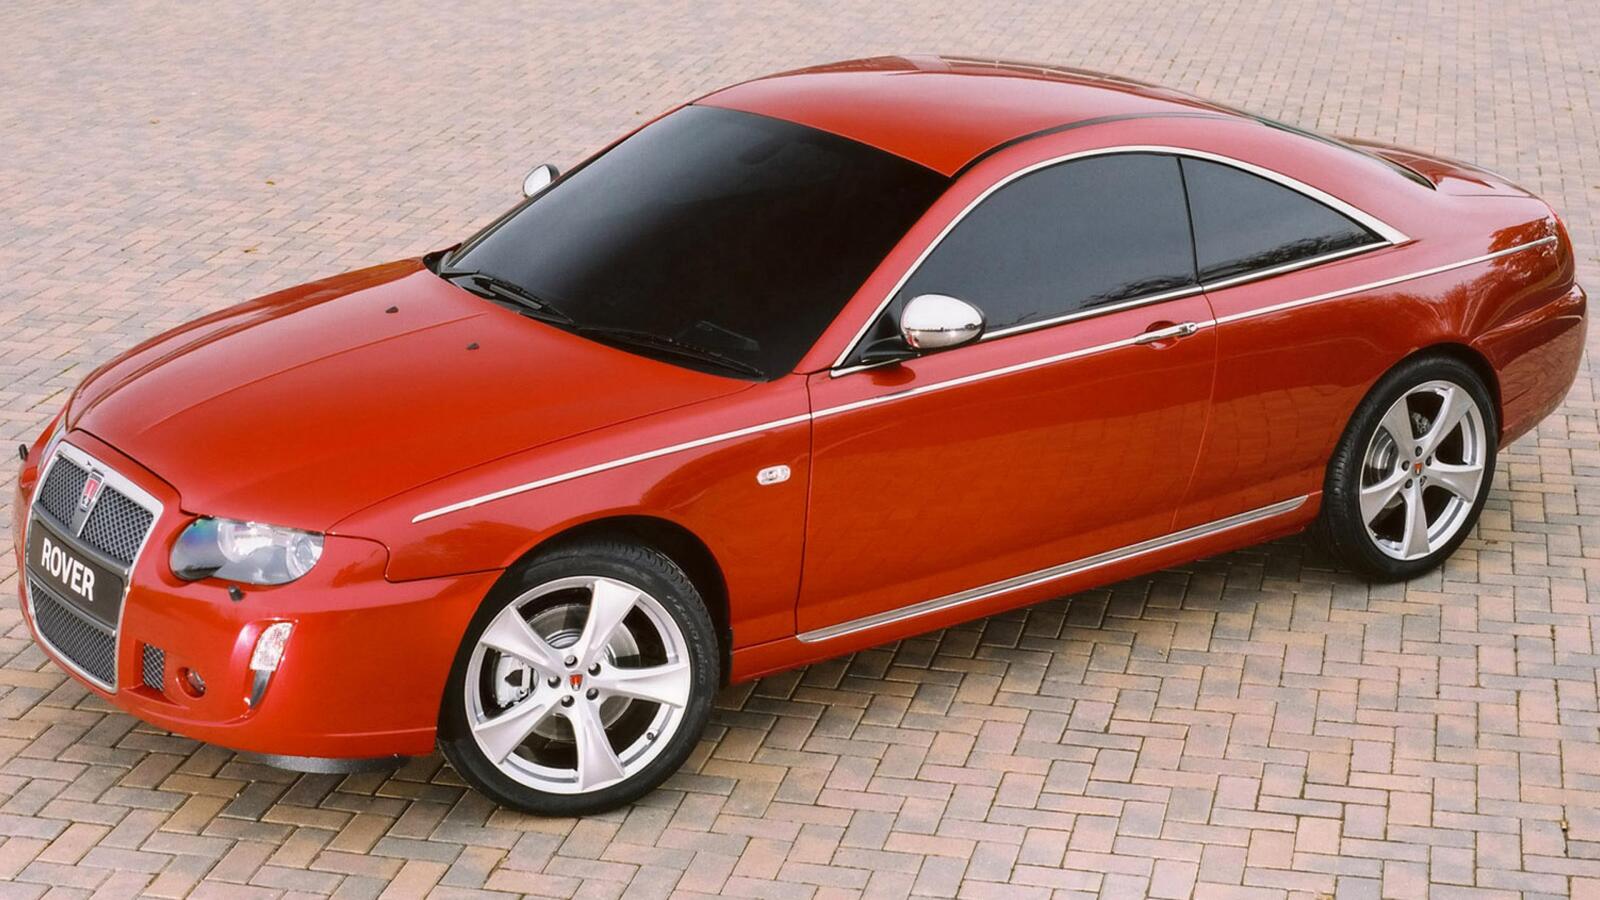 Wallpapers Rover MG ZT Rover 75 on the desktop